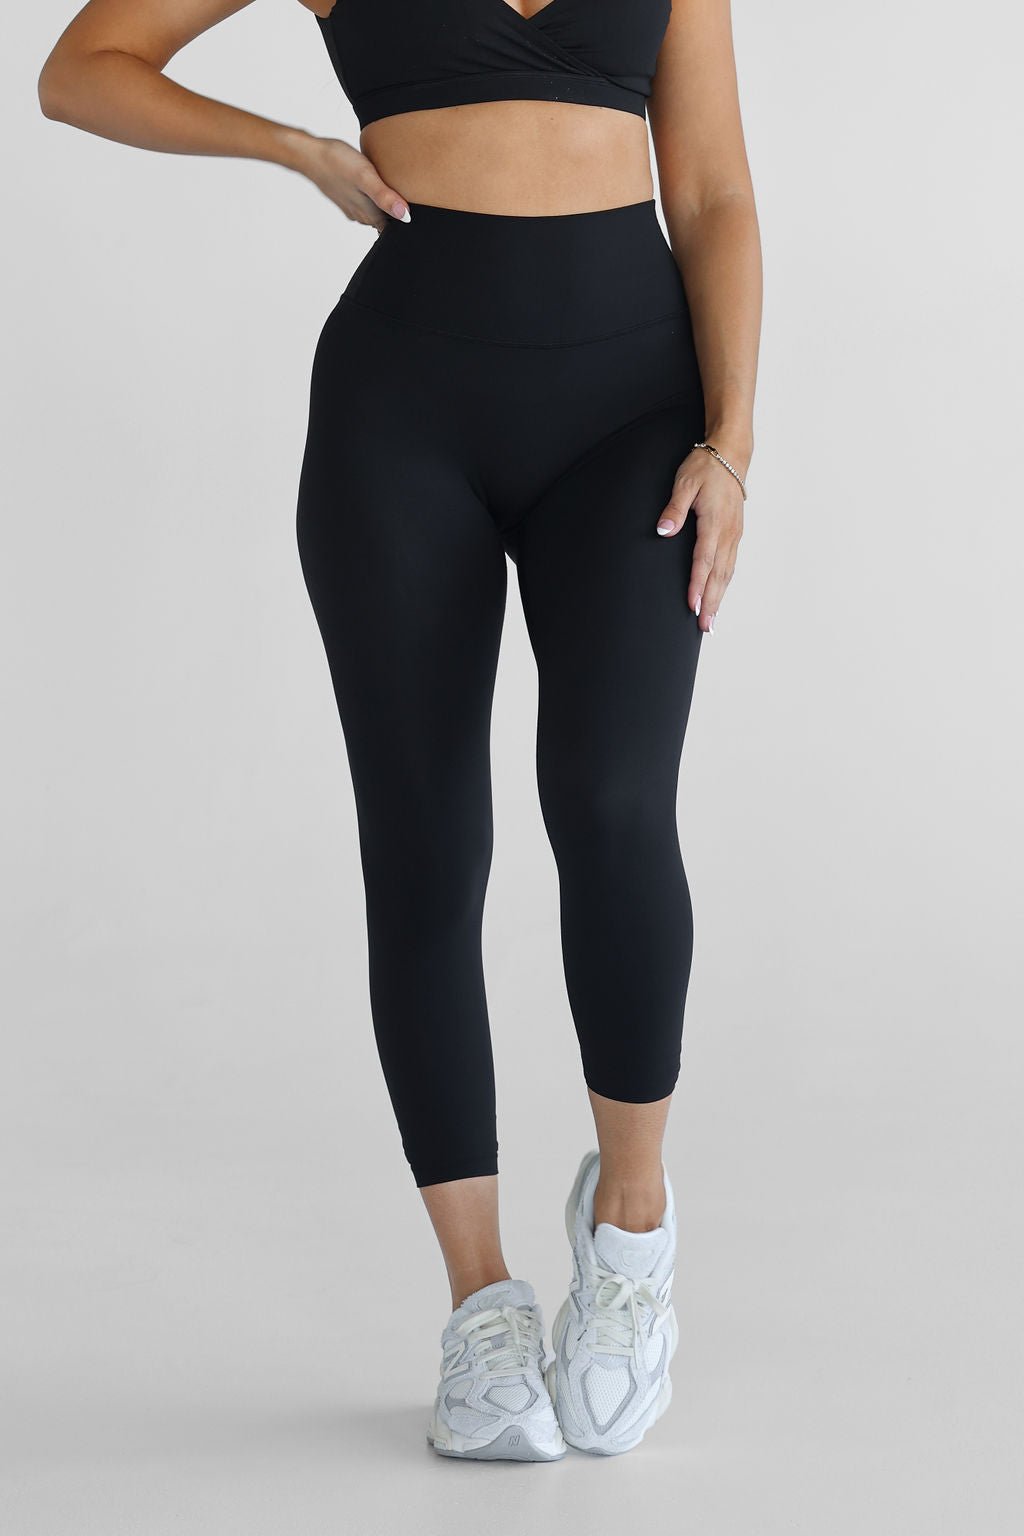 Black 7/8 Leggings, High Waisted, Squat Proof, 5 Star Rated